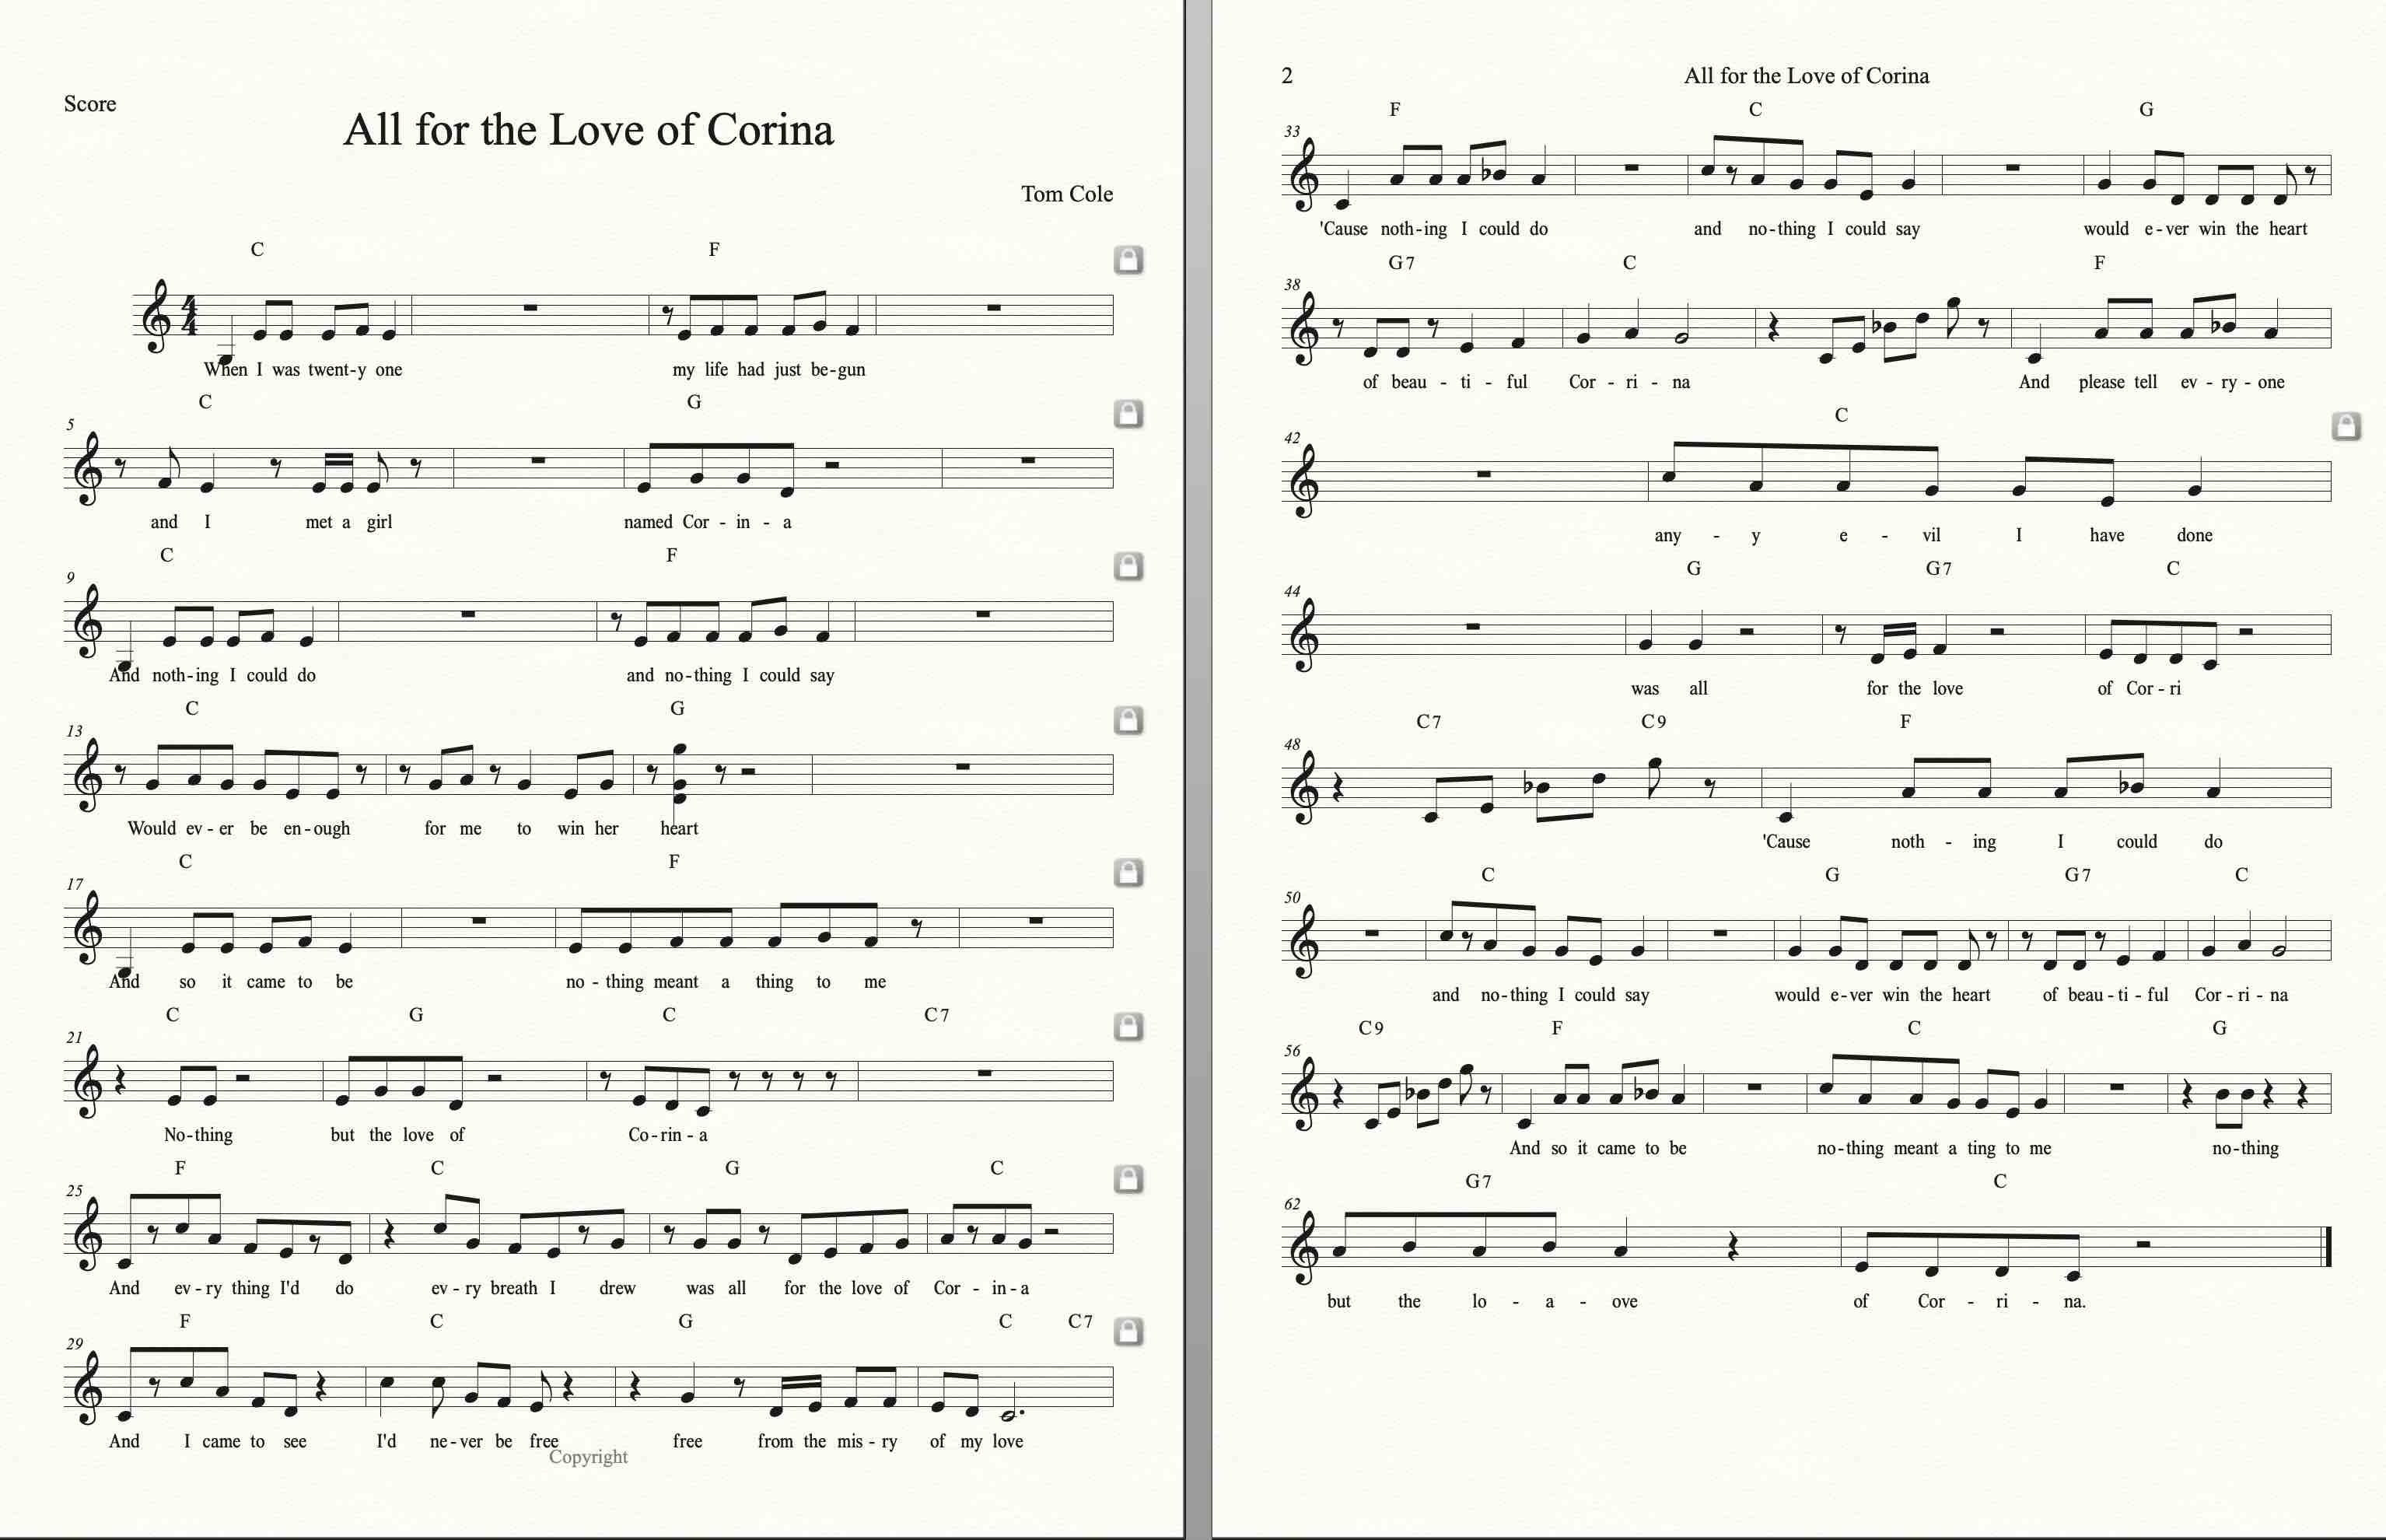 I Was Born Under A Wandering Star Chords All for the Love of Corina Sheet Music.jpg